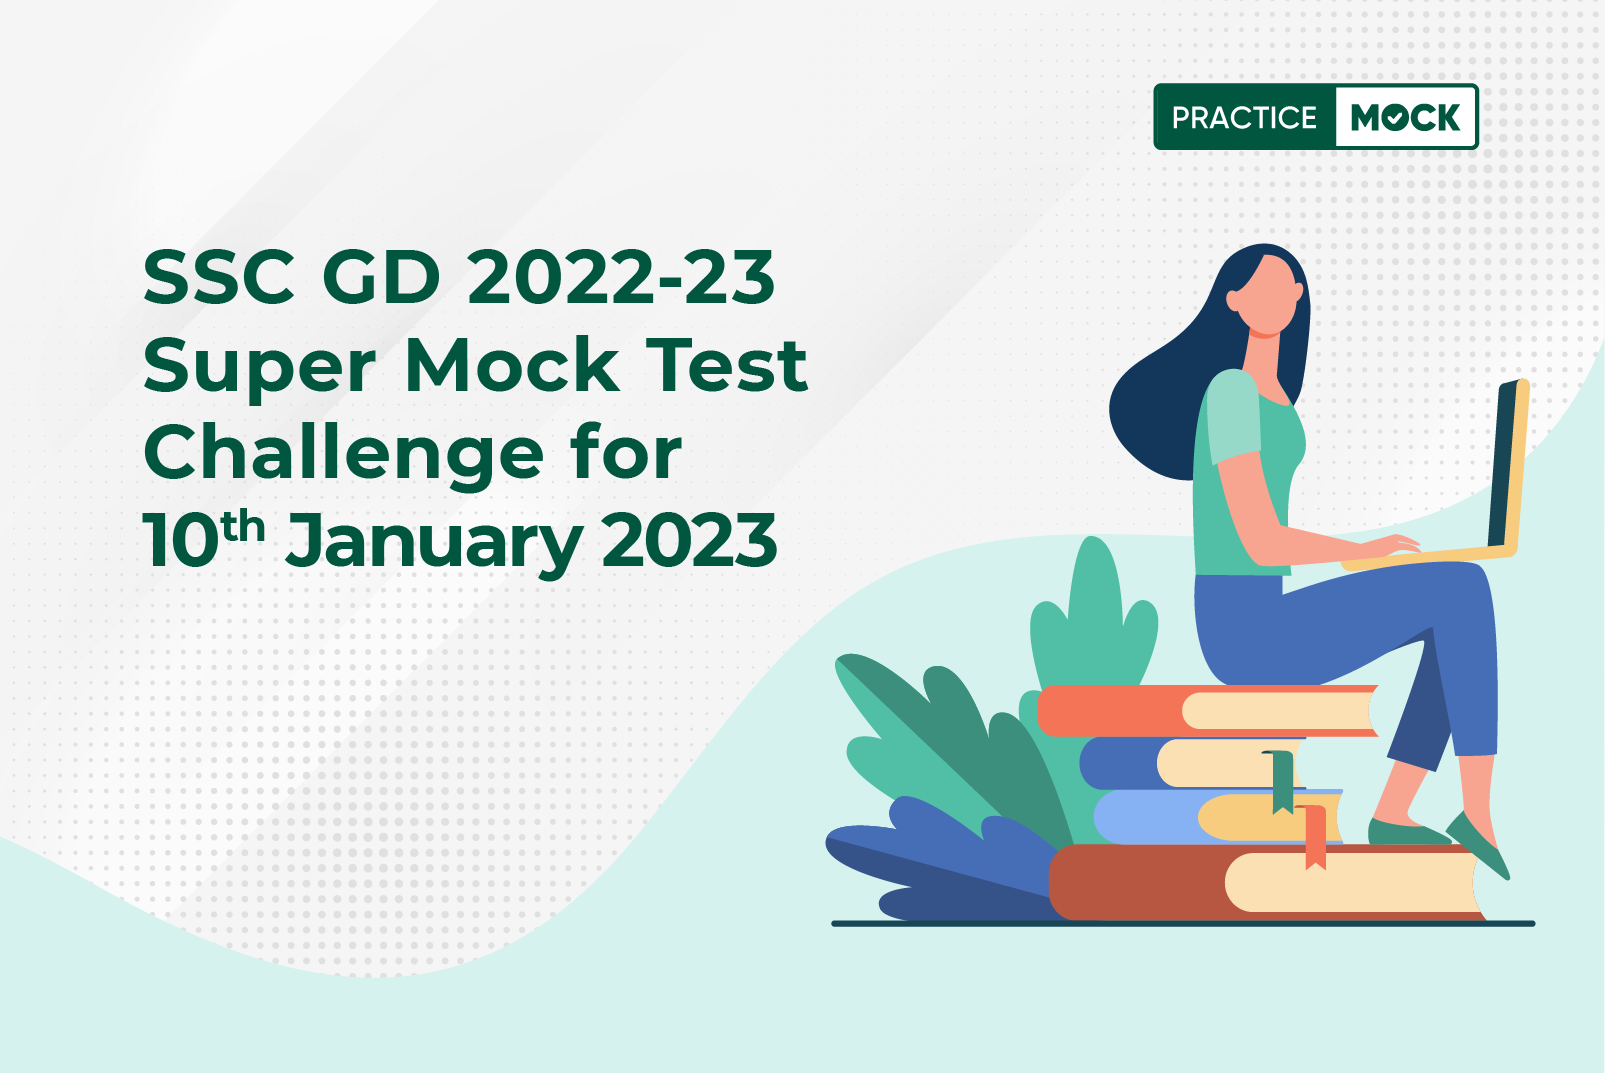 SSC GD Super Mock Test Challenge for 10th January 2023